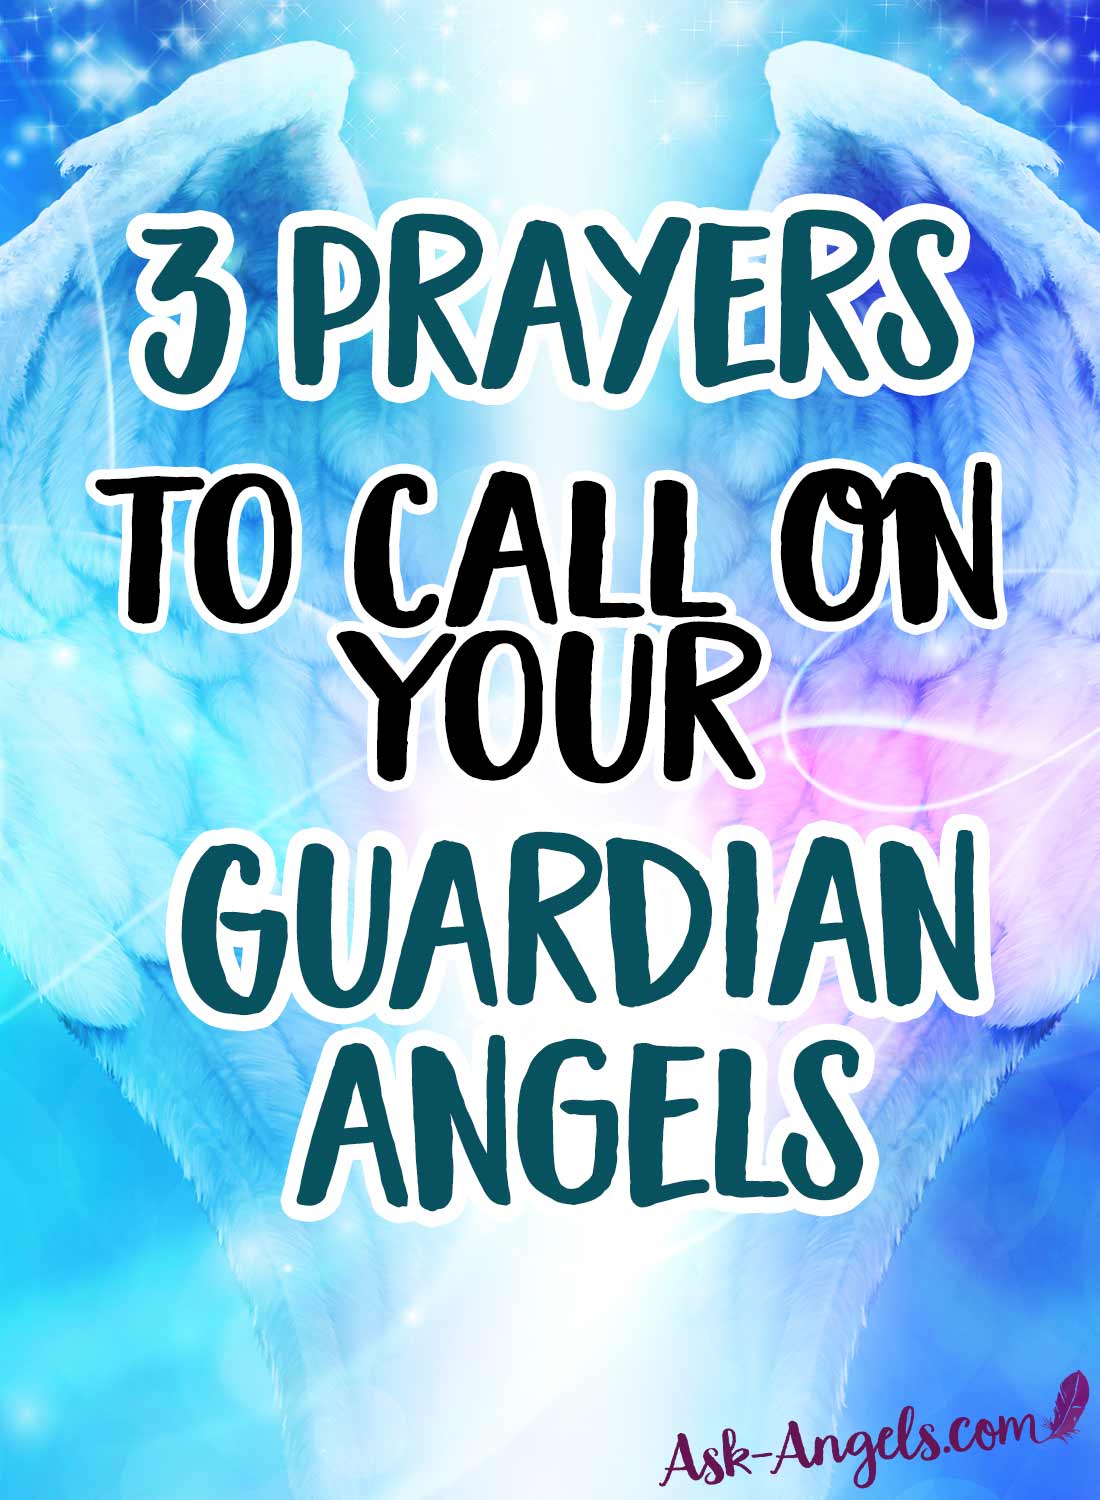 3 Prayers to Call On Your Guardian Angels